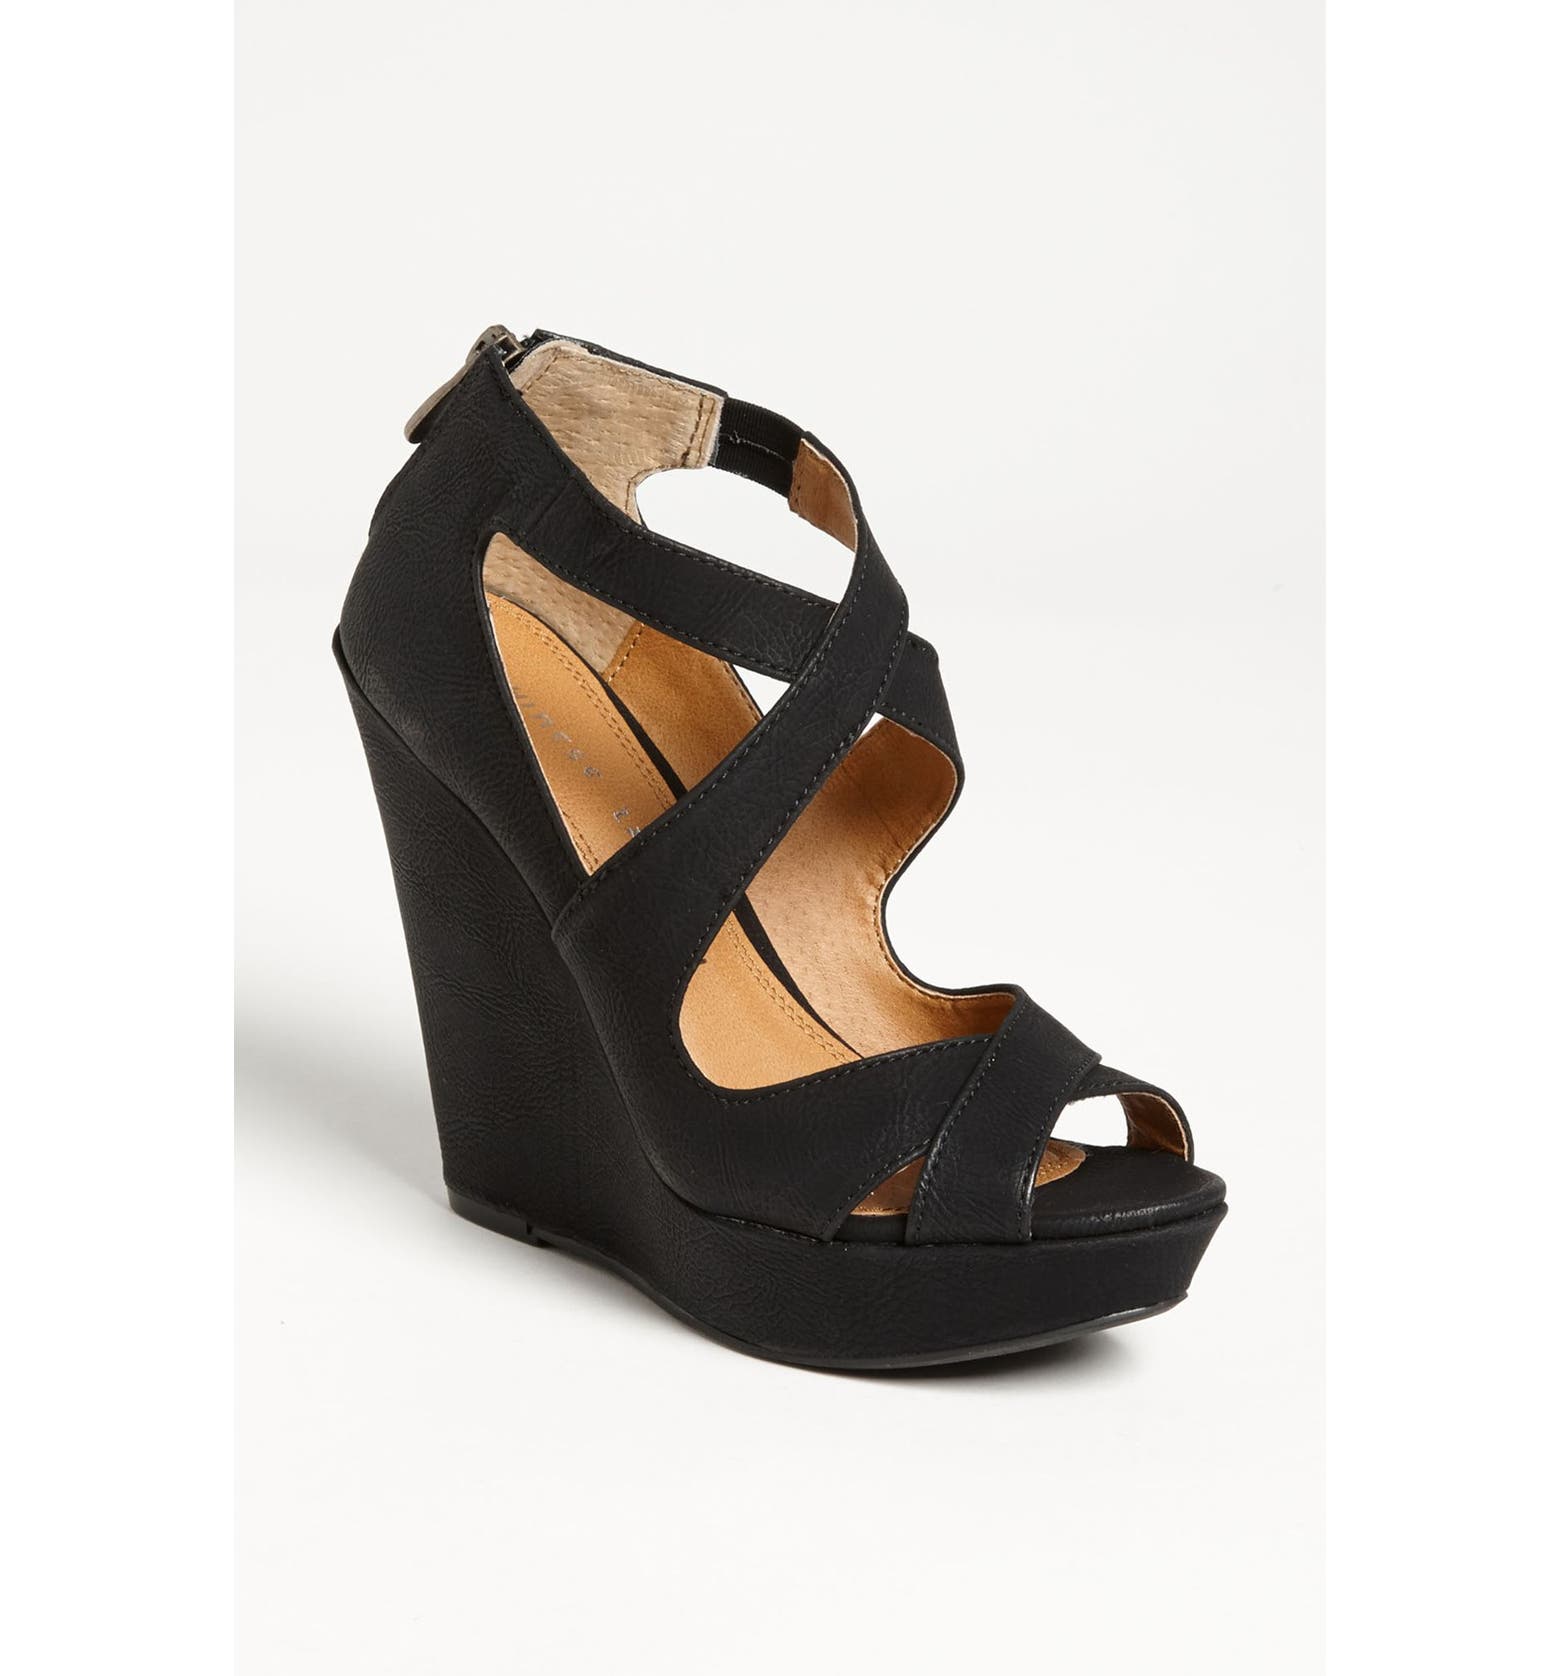 Chinese Laundry 'Motion' Pump | Nordstrom